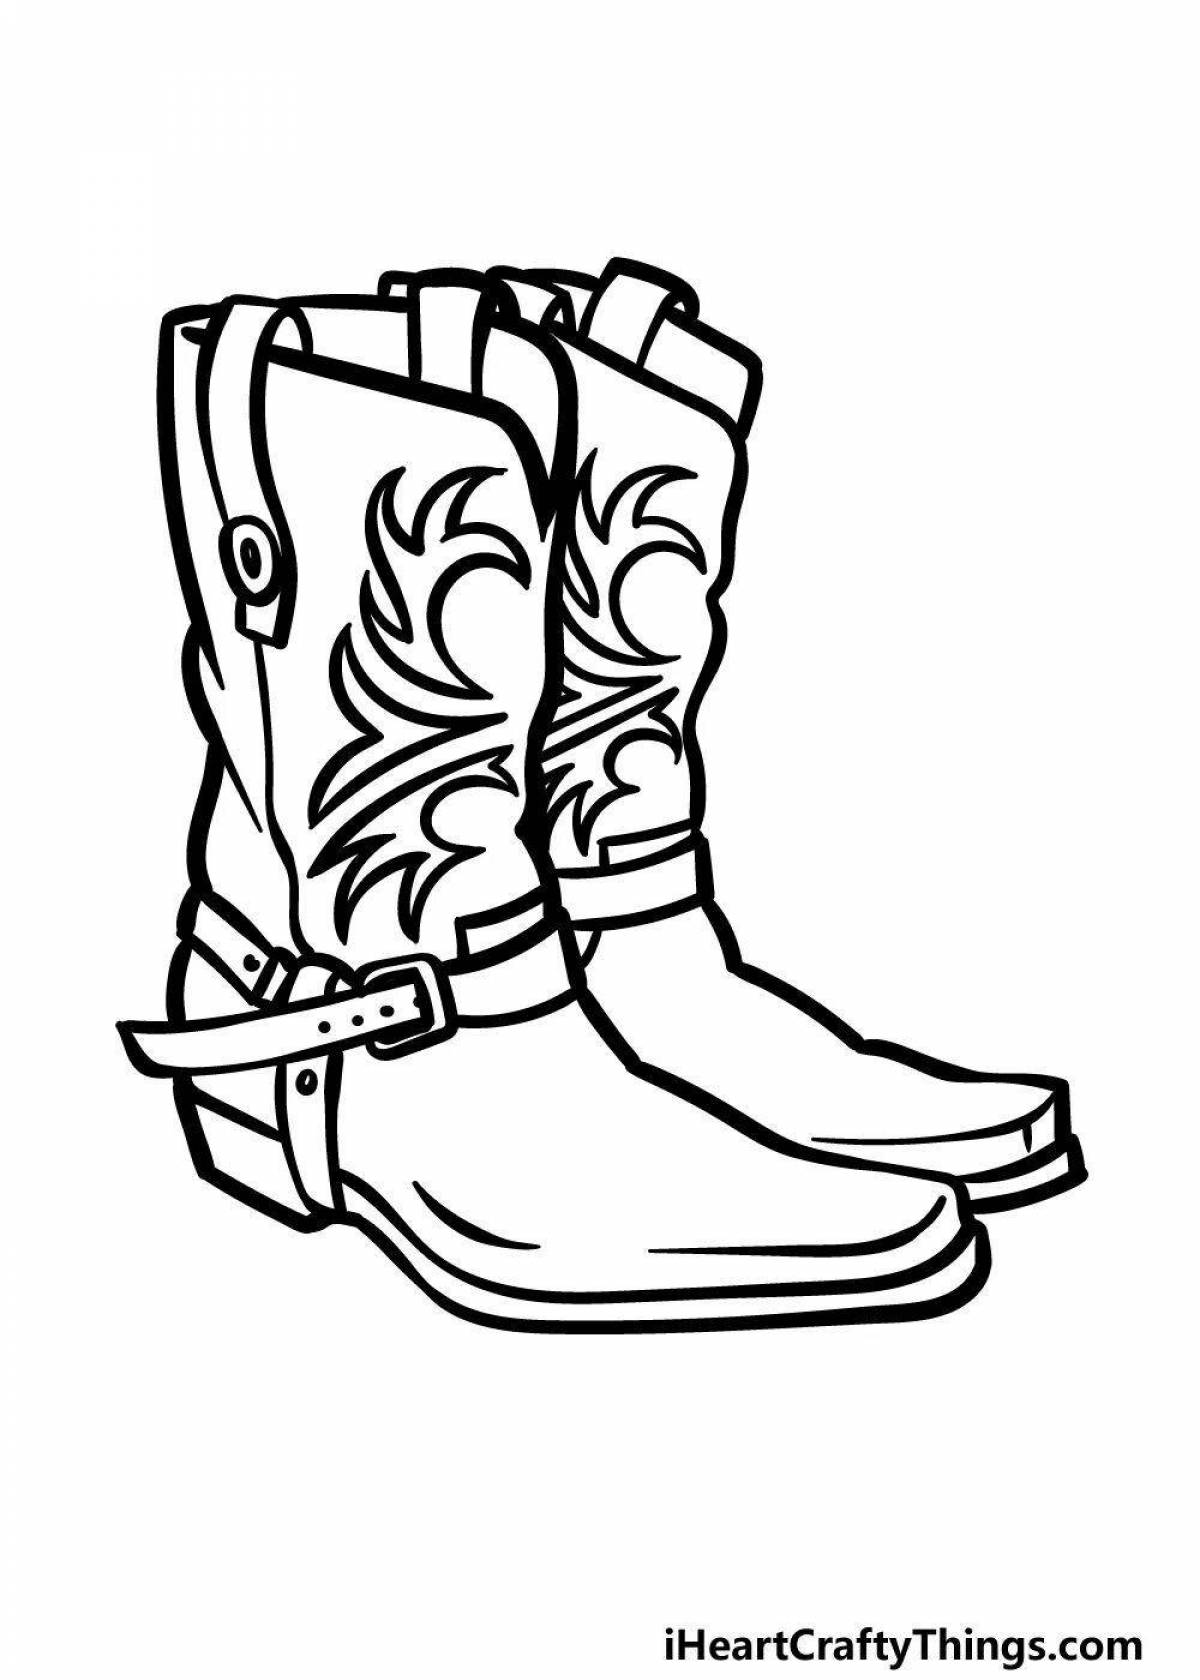 Coloring page chic walking boots